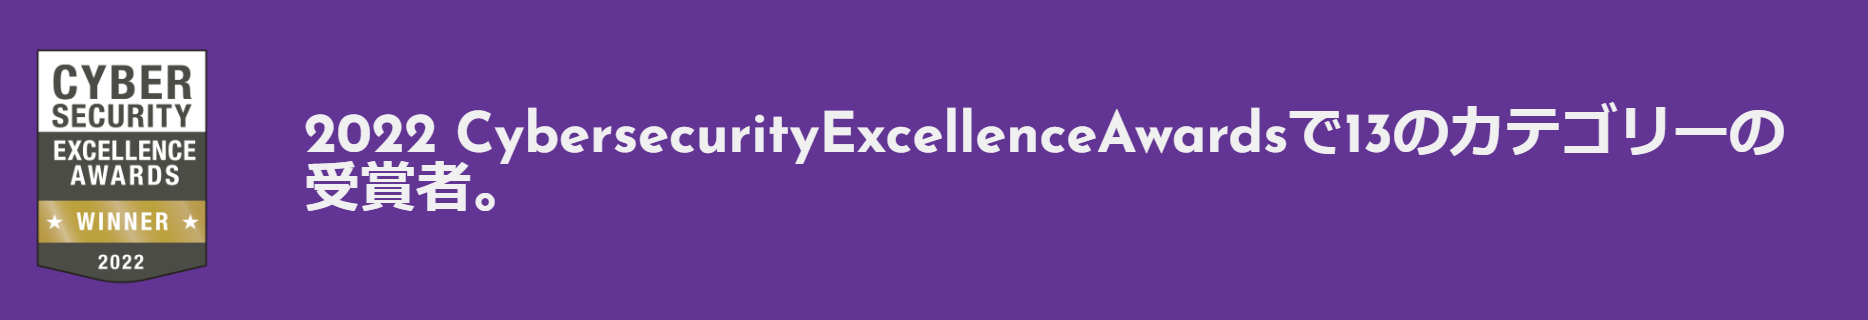 Winner in 13 categories at the 2022 Cybersecurity Excellence Awards.